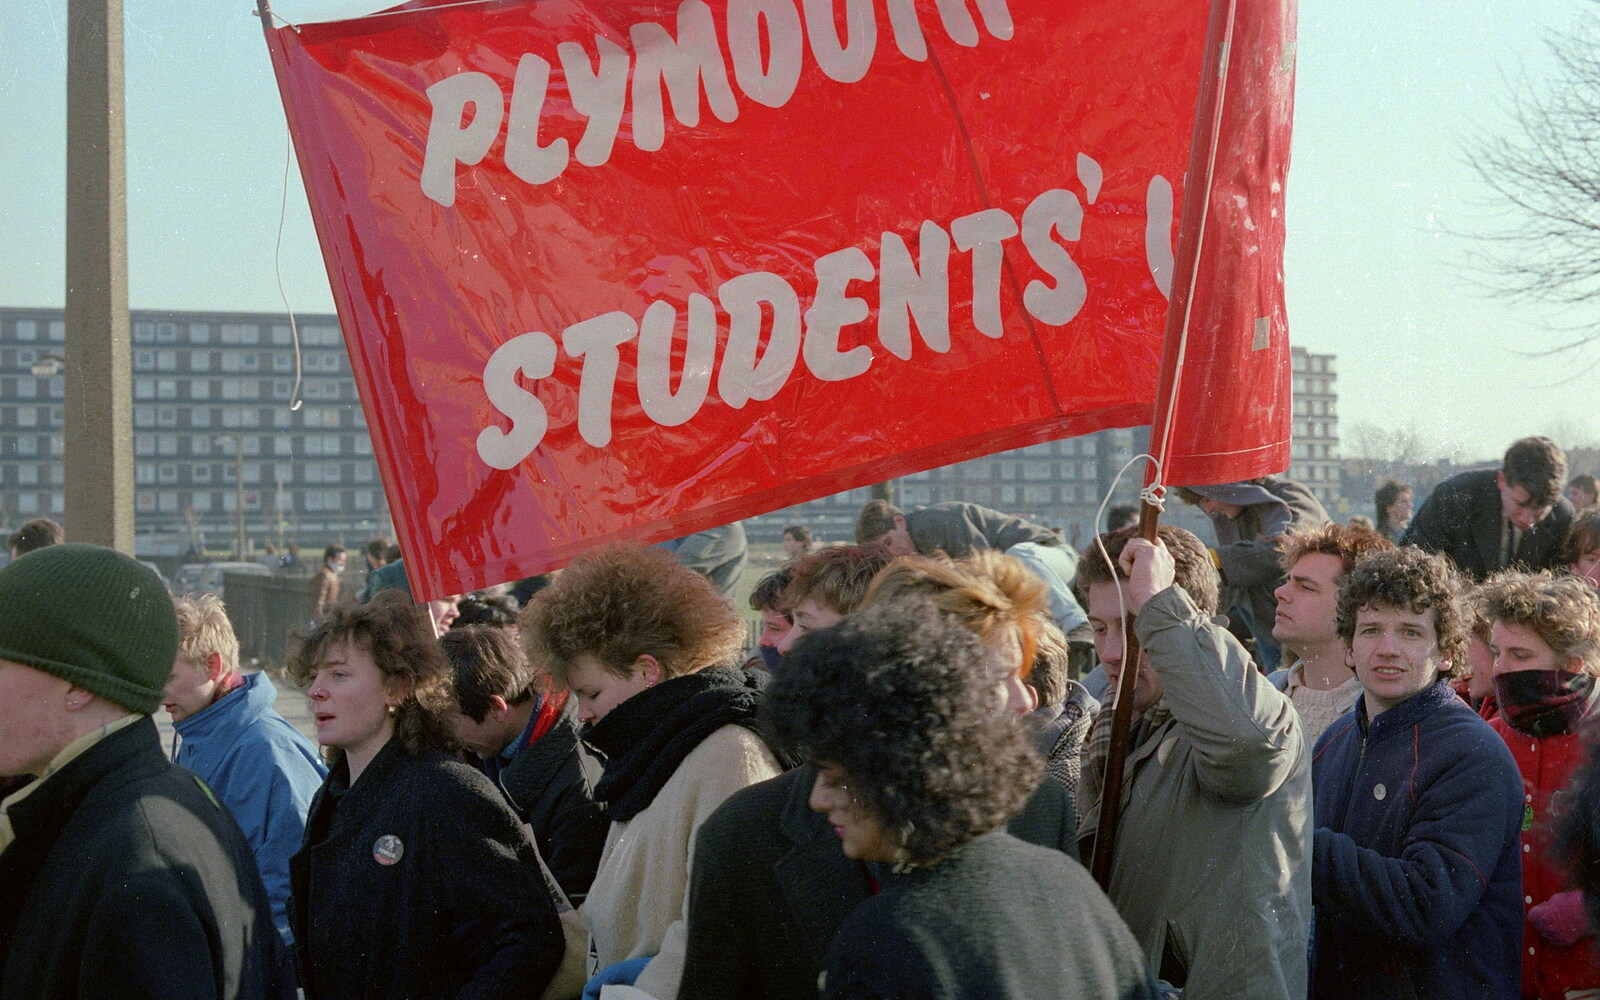 Plymouth Students, indeed from Uni: No Chance Fowler! A student Demonstration, London - 26th February 1986